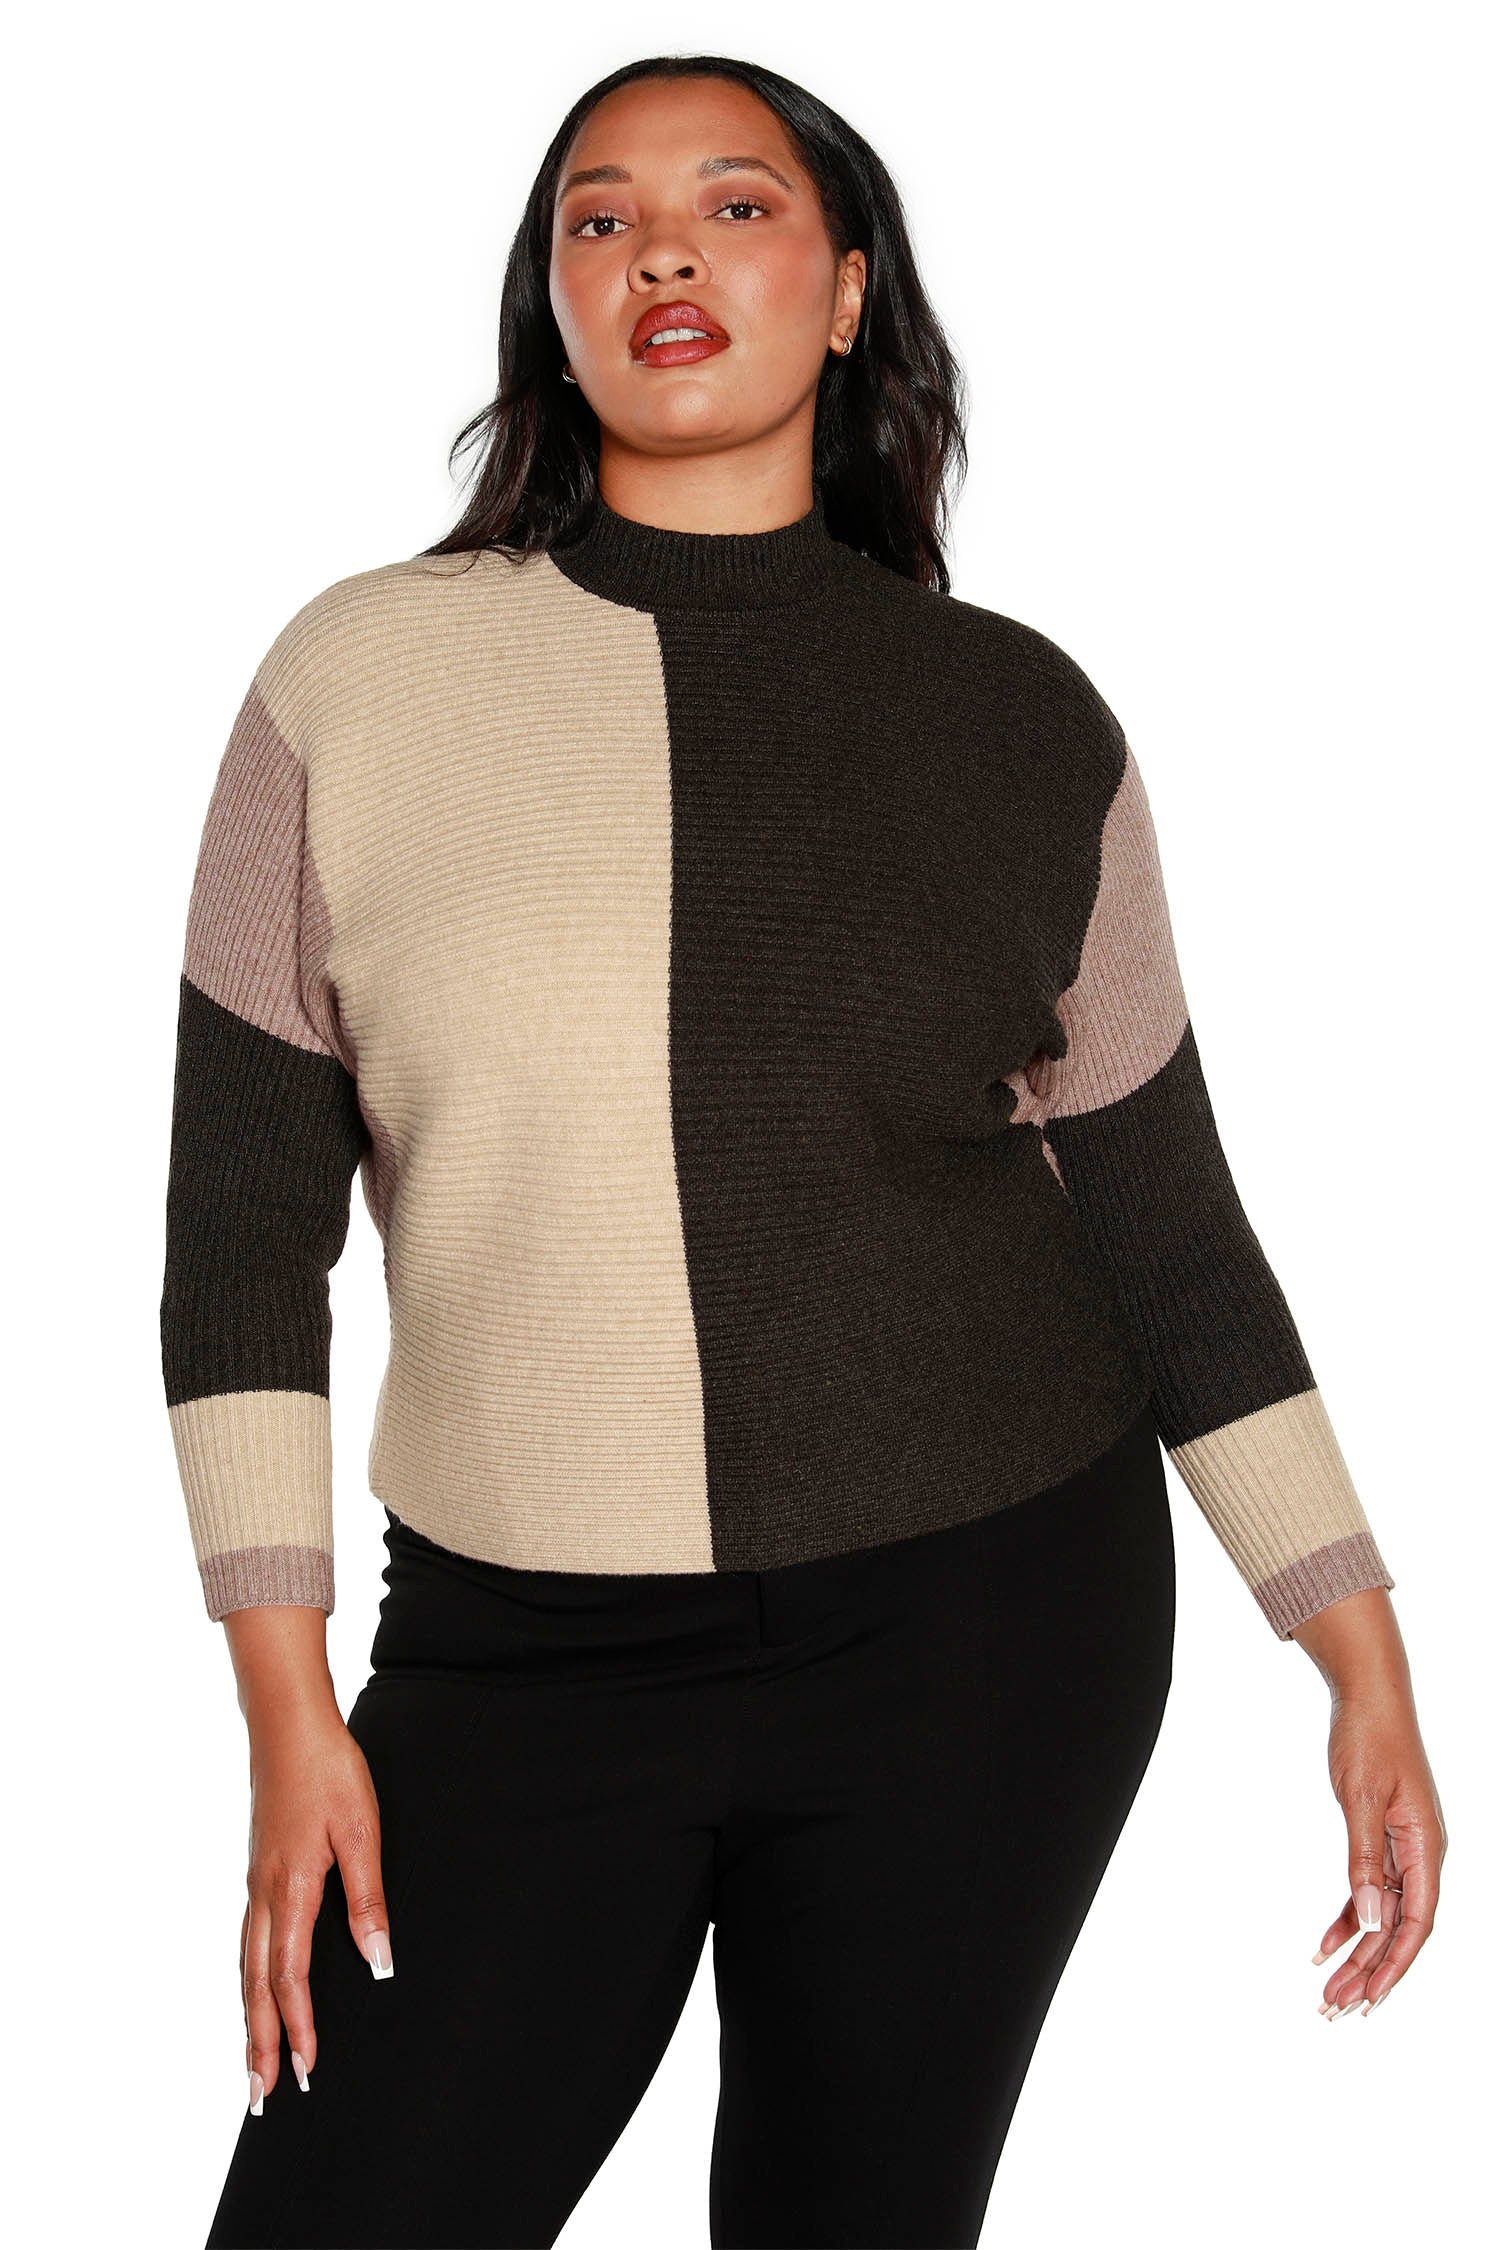 Women's Pullover Sweater in a Soft Mini Rib Color Block Knit with a Mock Neck | Curvy